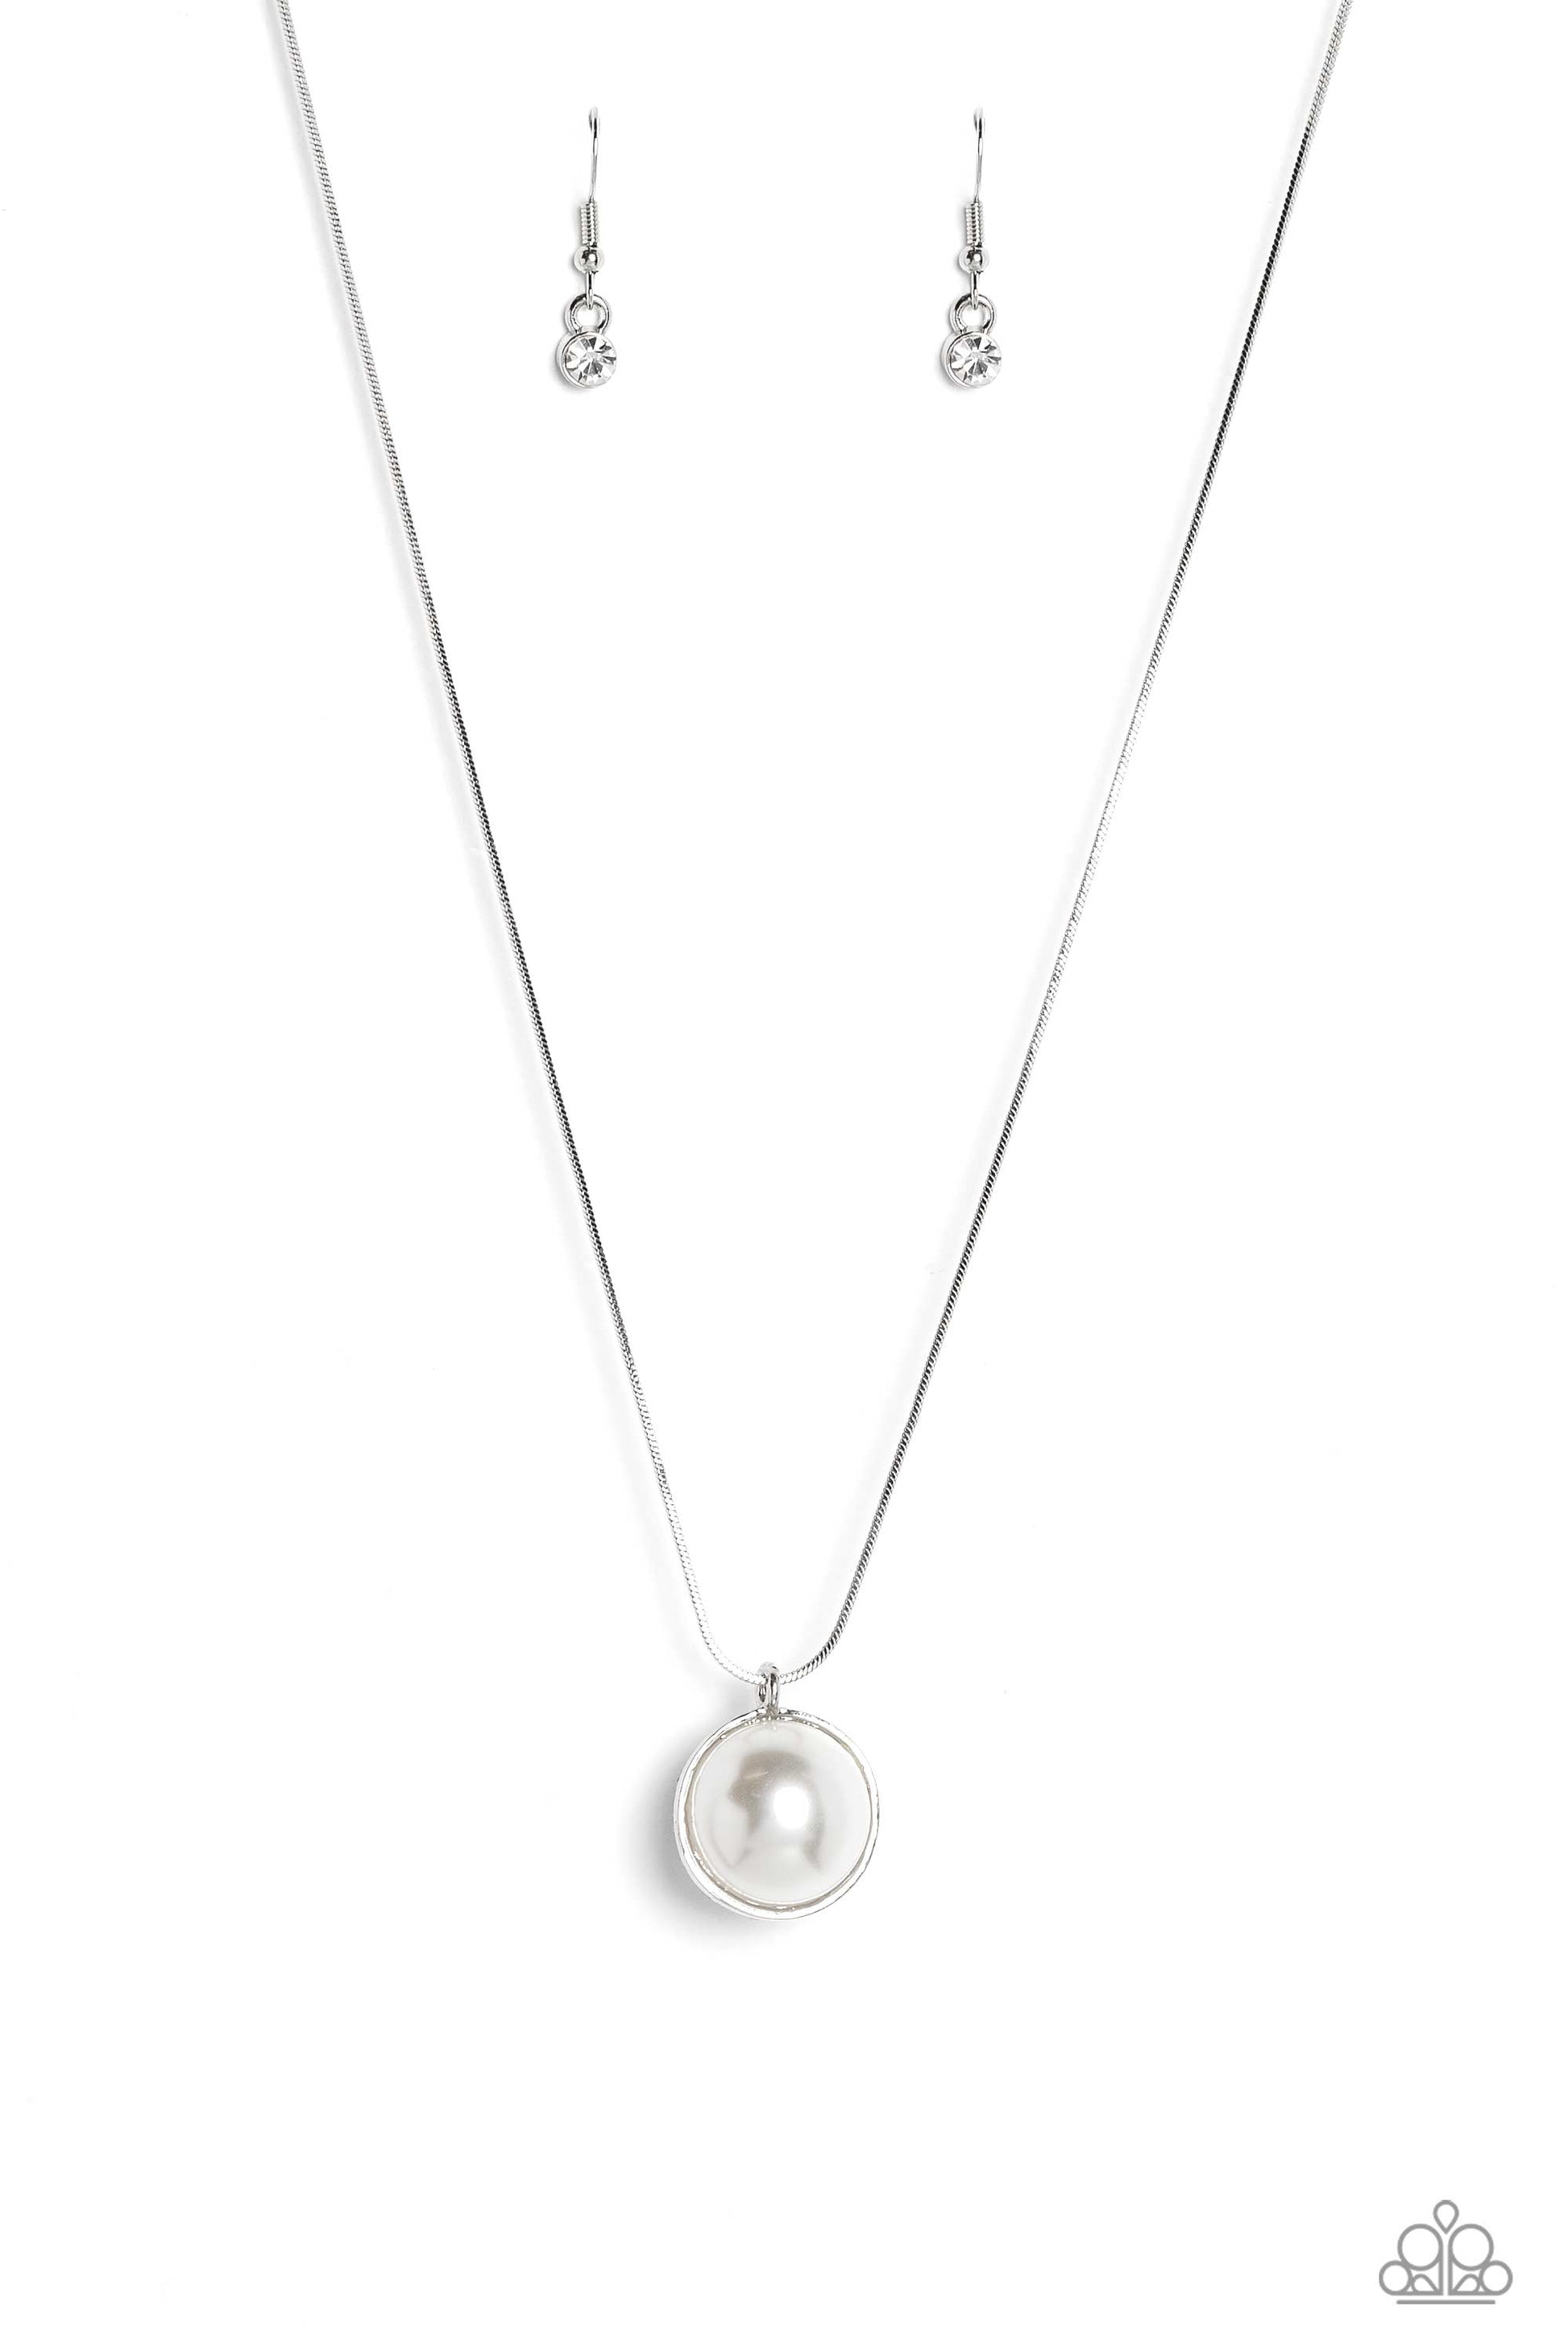 Haute Hybrid - White Pearl and Silver Necklace - Paparazzi Accessories - Cascading from a shiny silver snake chain, a sparkly white rhinestone-encrusted ornament and a classic white pearl meet to create a half-and-half refined pendant.